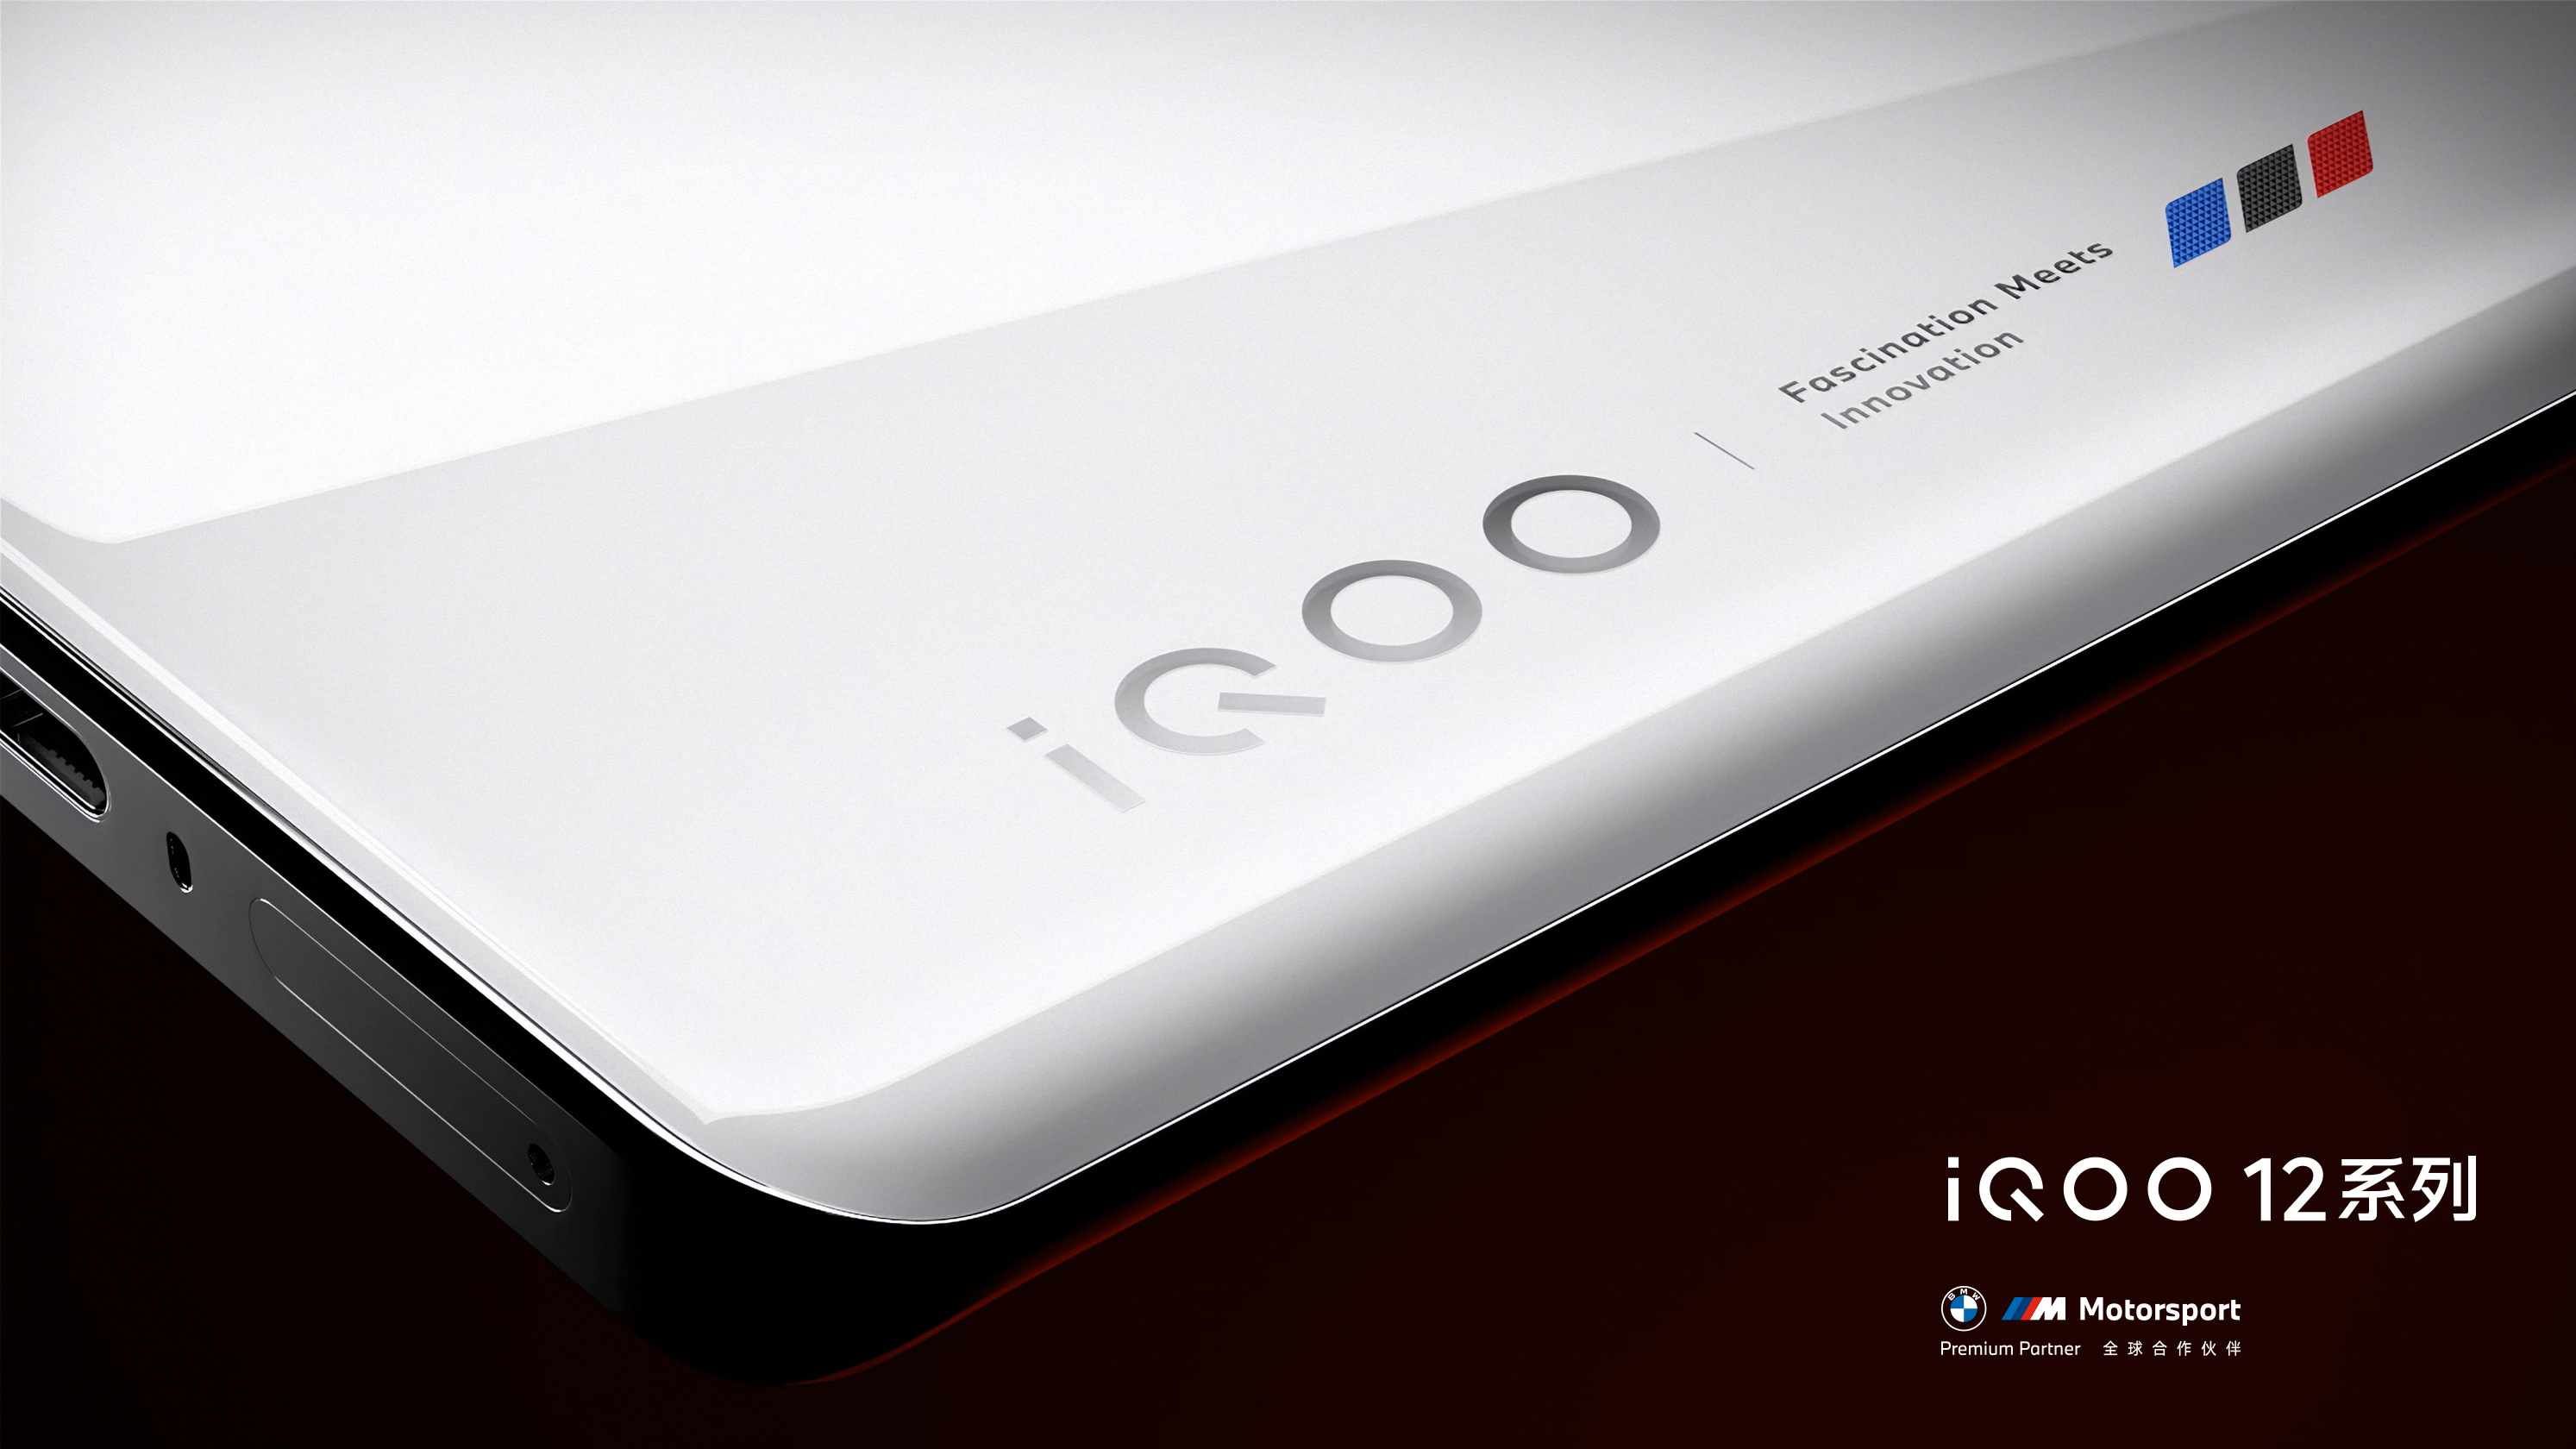 iQOO 12 Professional set to launch as Snapdragon 8 Gen 3-powered, 144fps gaming, 100X Tele Lens flagship Android smartphone